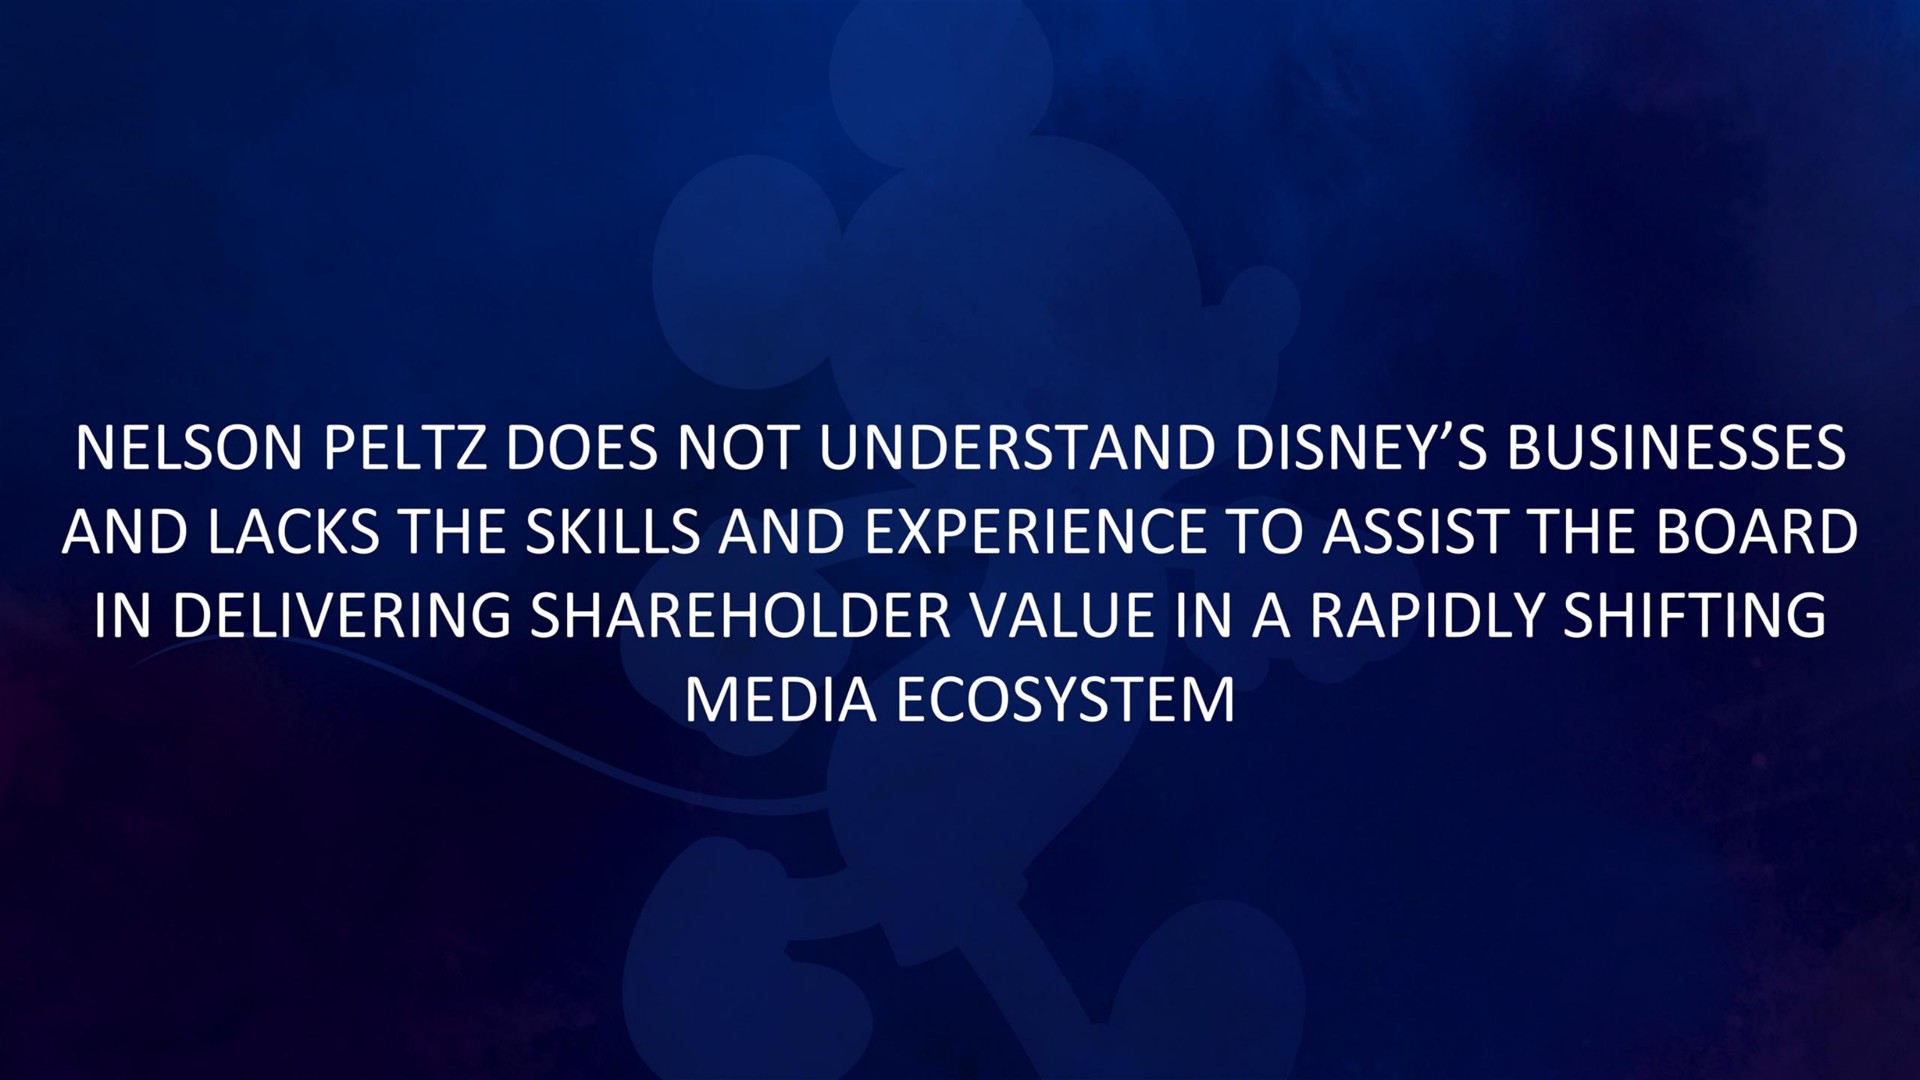 nelson does not understand businesses and lacks the skills and experience to assist the board in delivering shareholder value in a rapidly shifting media ecosystem | Disney